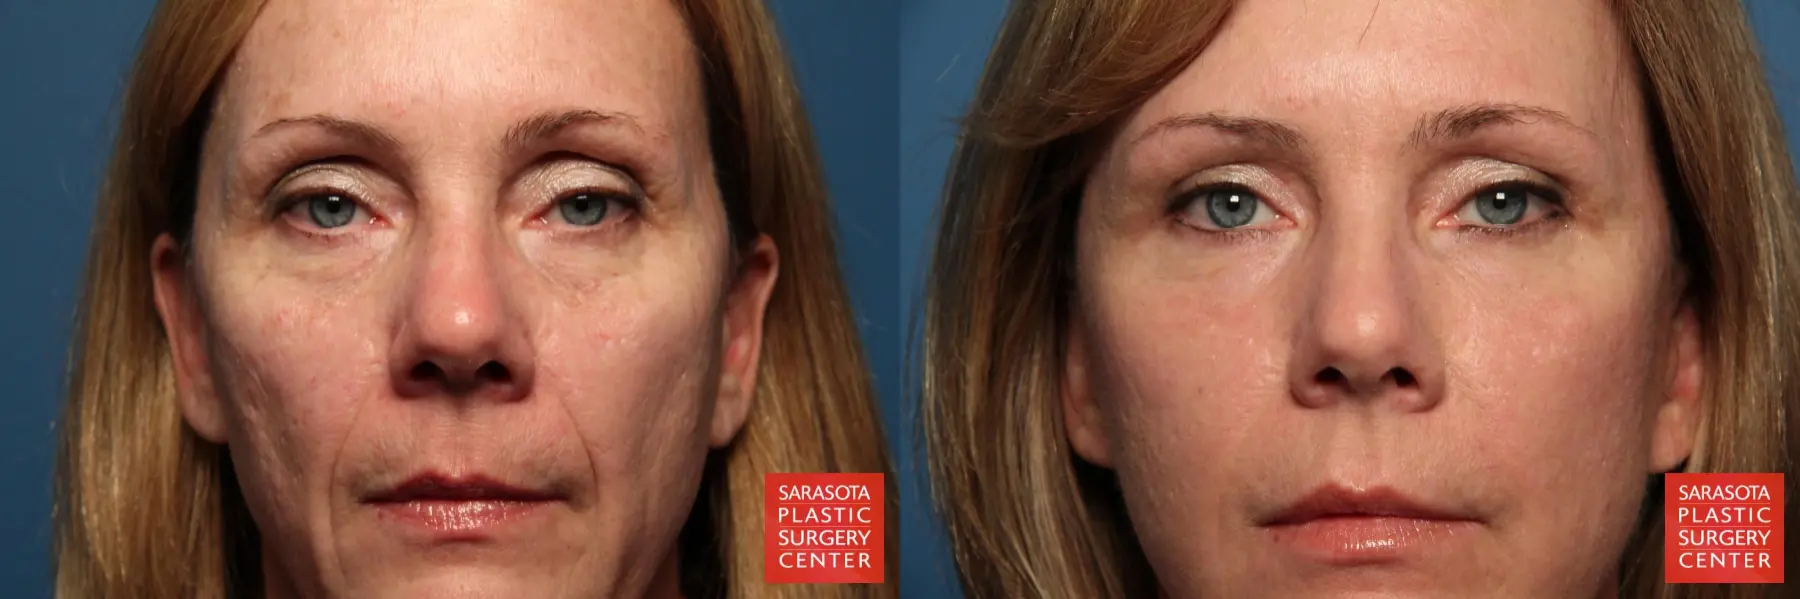 Eyelid Lift: Patient 2 - Before and After 1